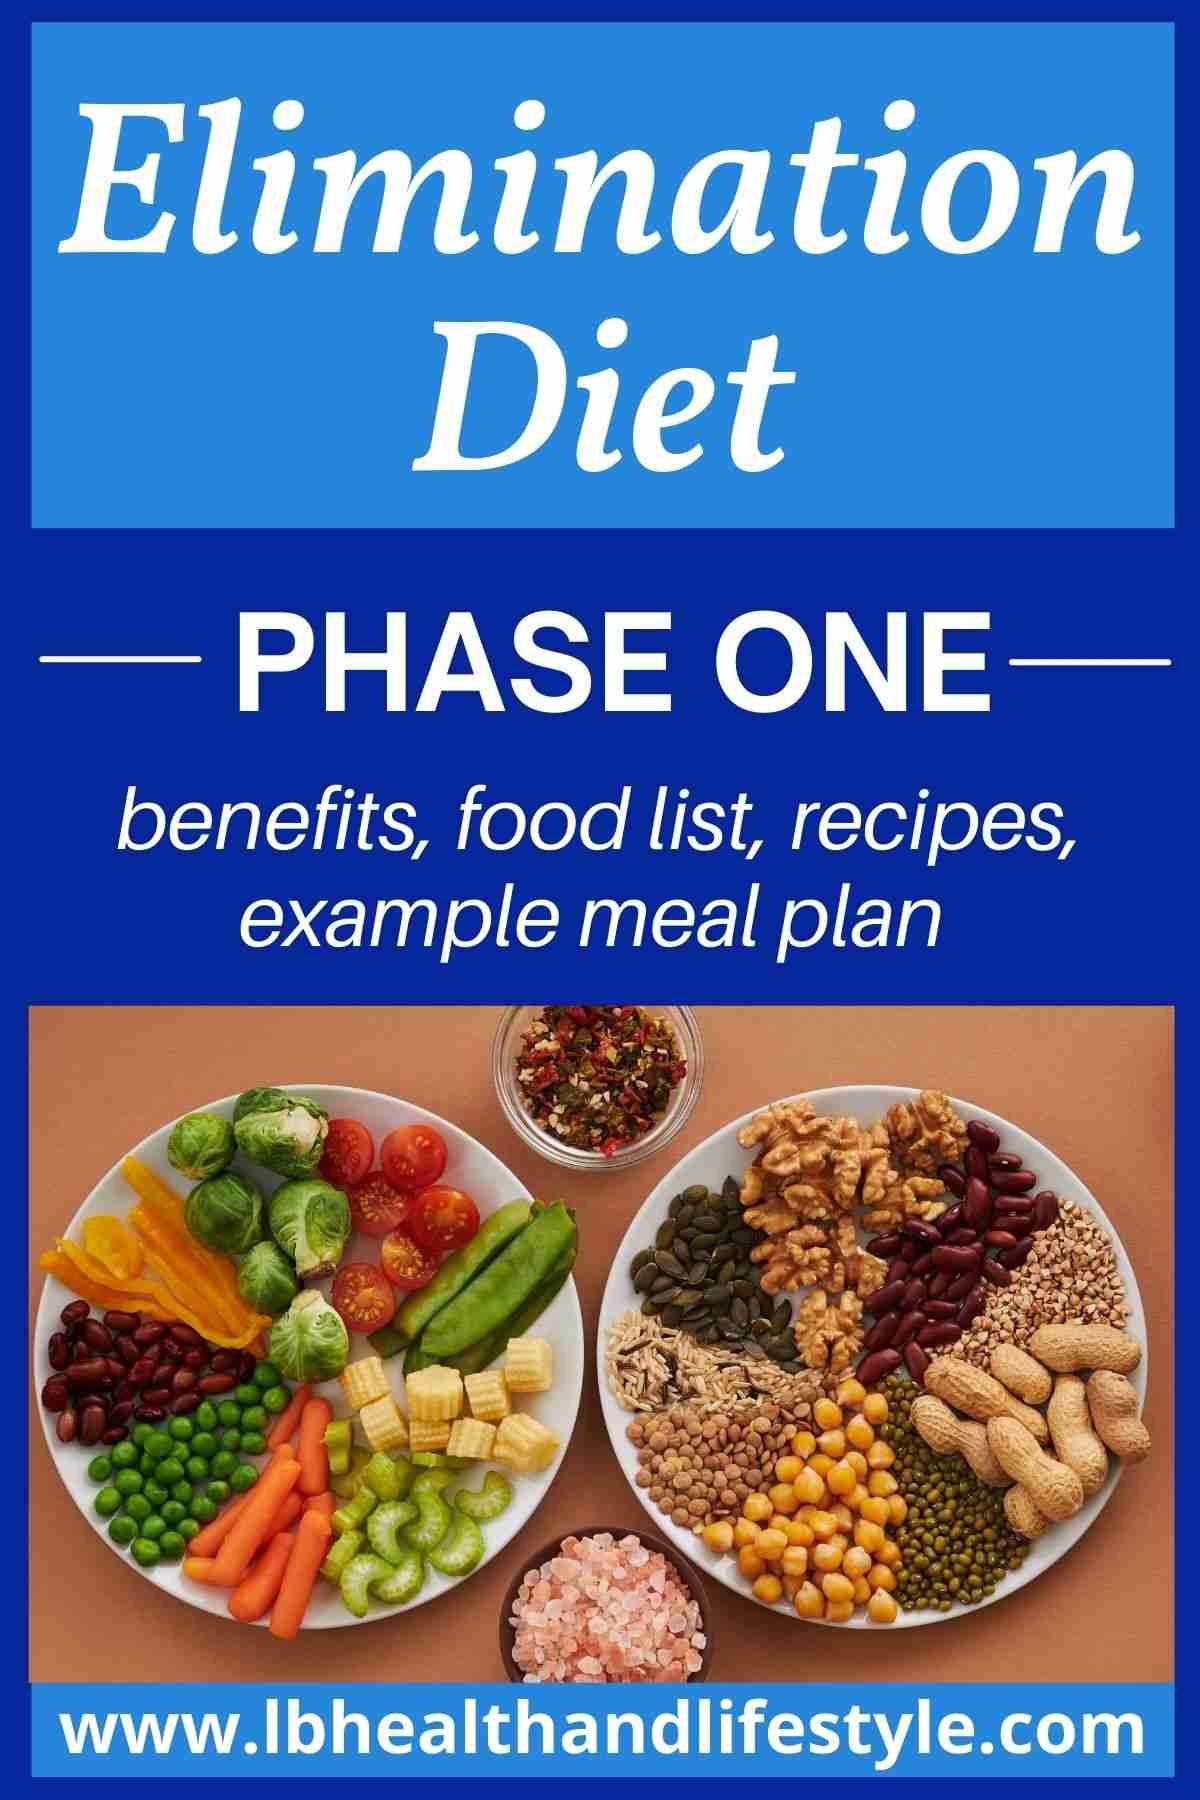 elimination diet phase 1 benefits, food list, recipes, example meal plan